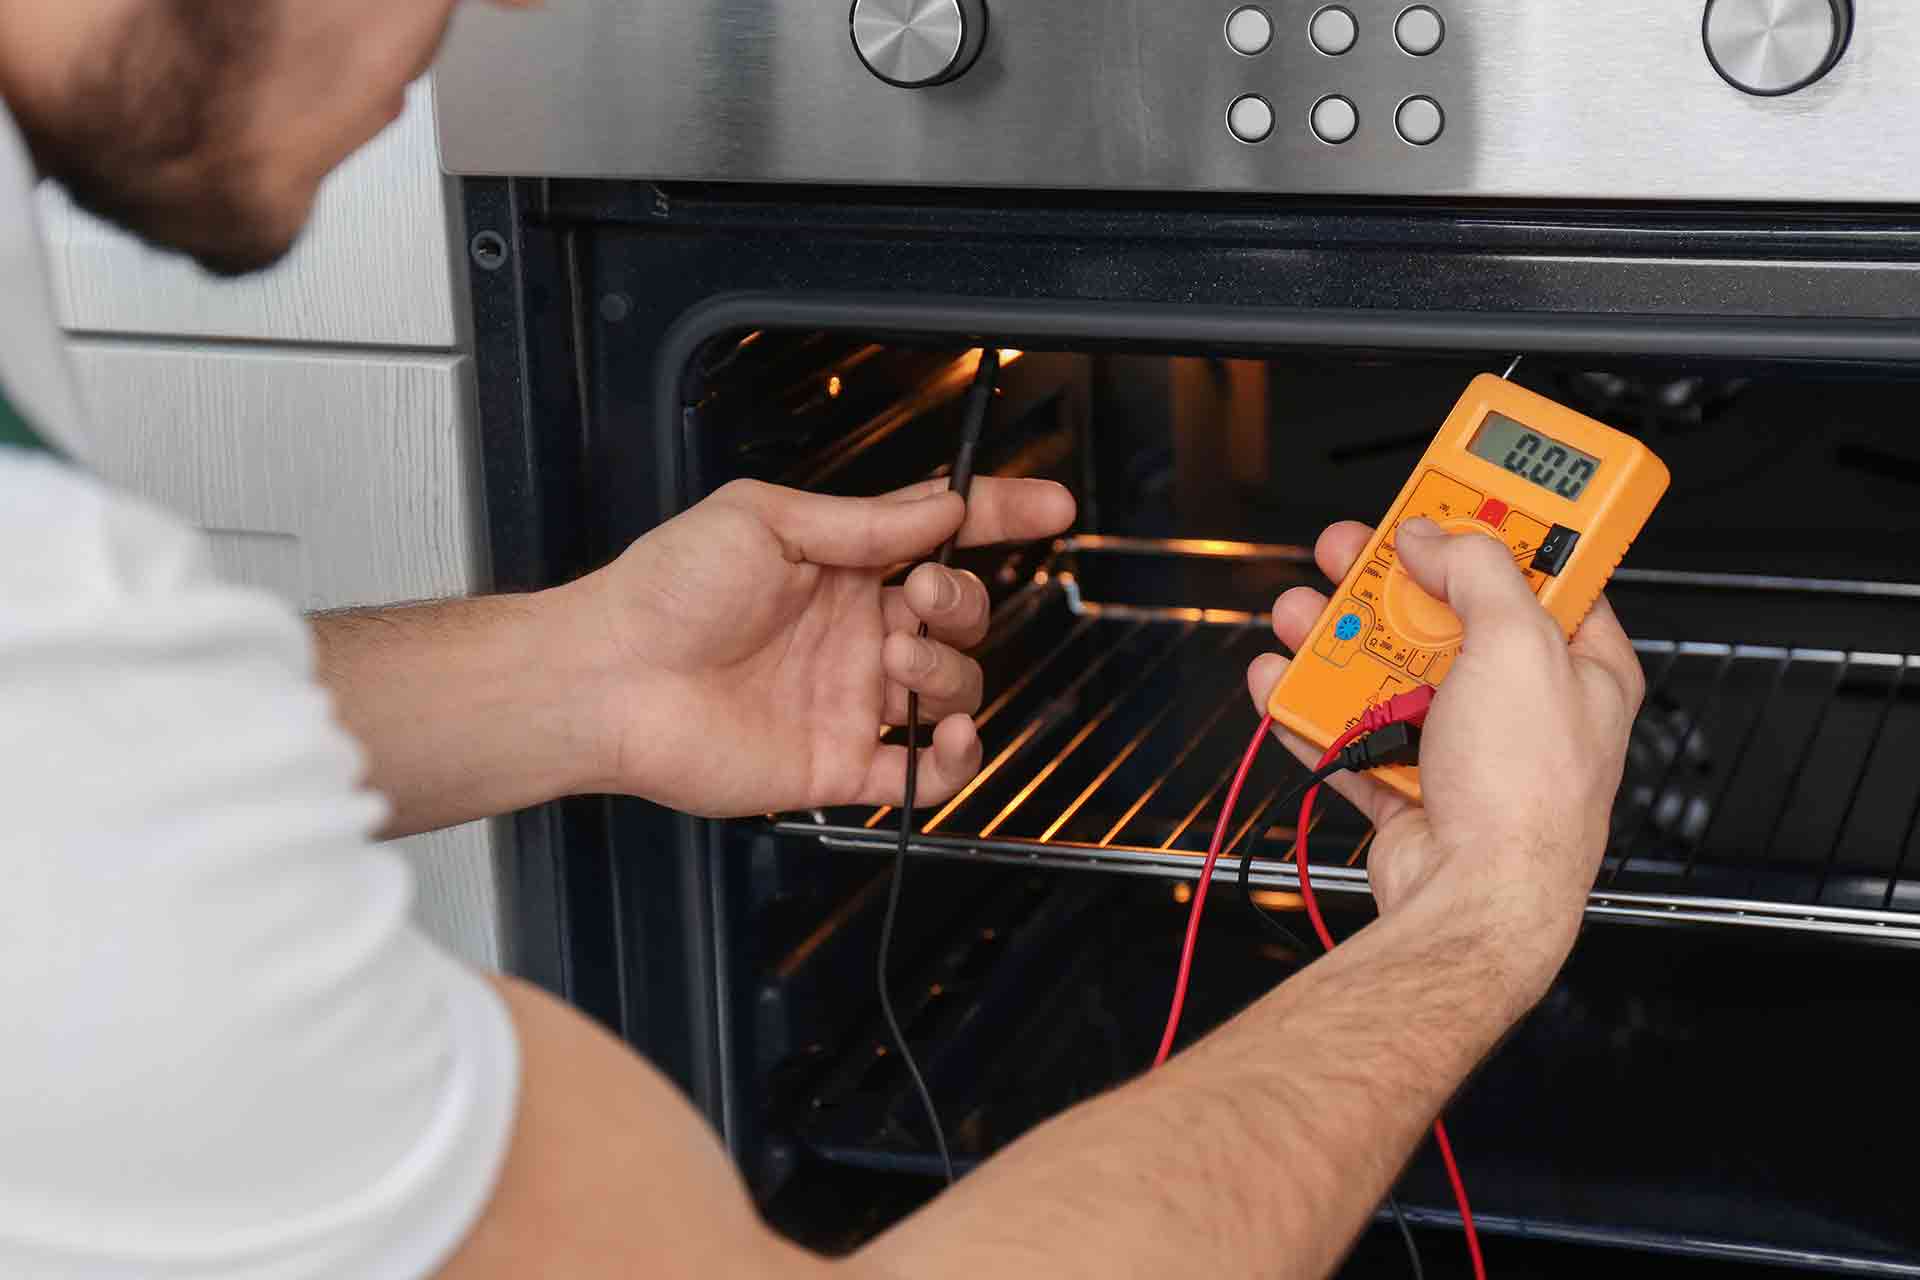 What Should I Look For When Buying A Range Oven? 7 Expert Tips